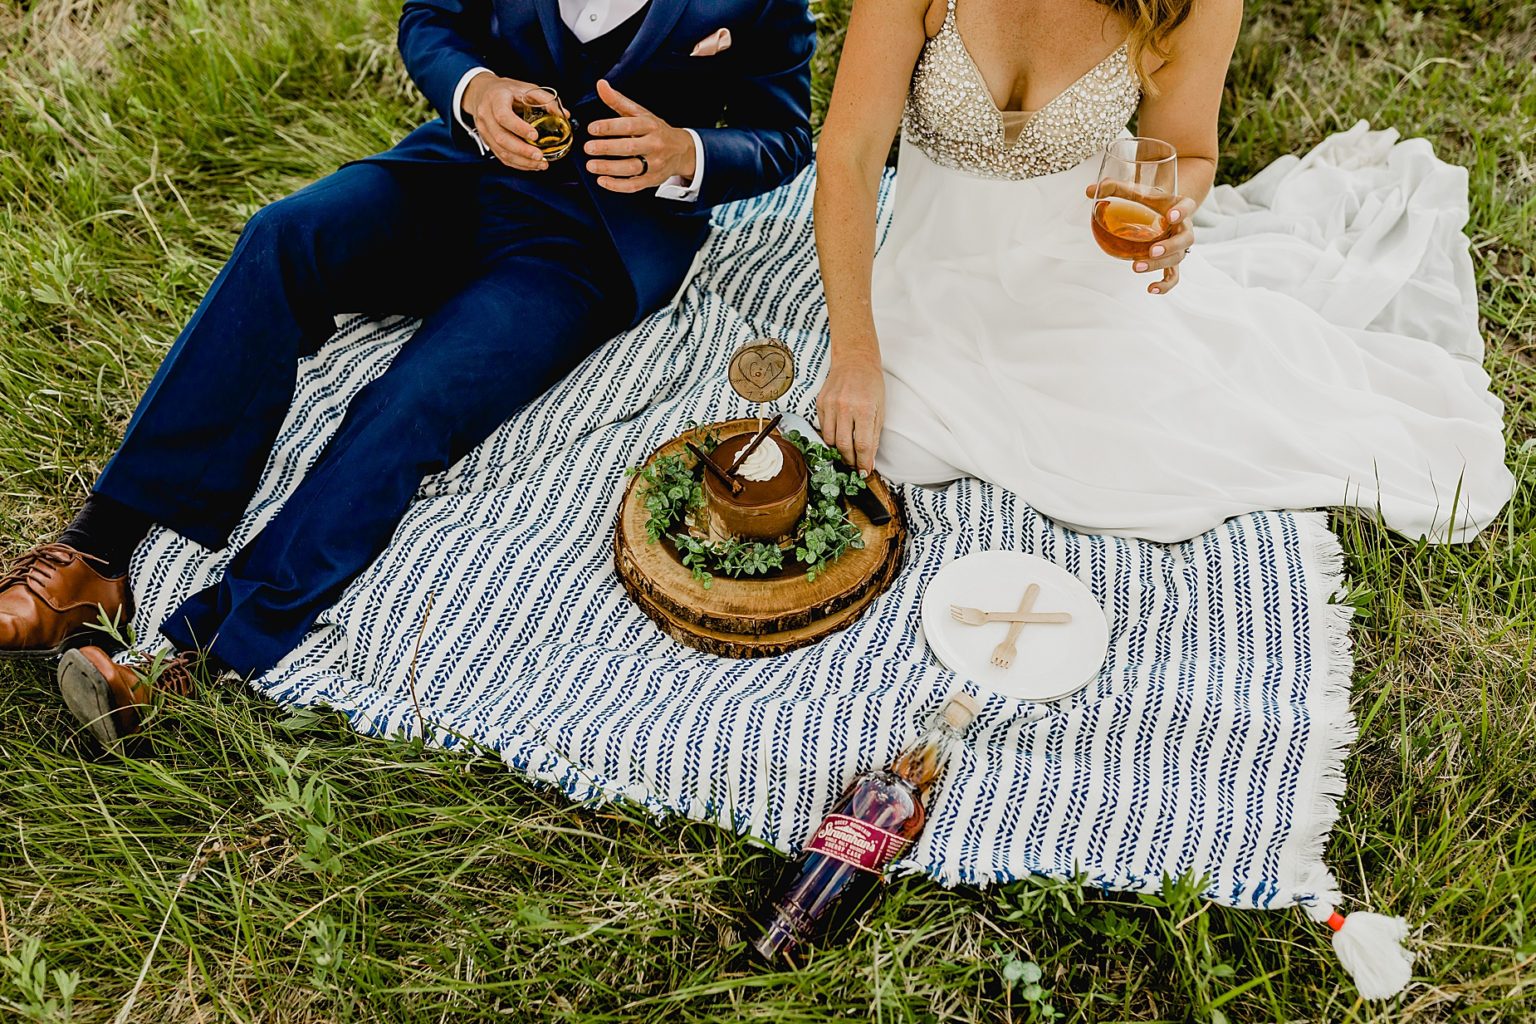 bride and groom share drinks in Estes Park while sitting in grass